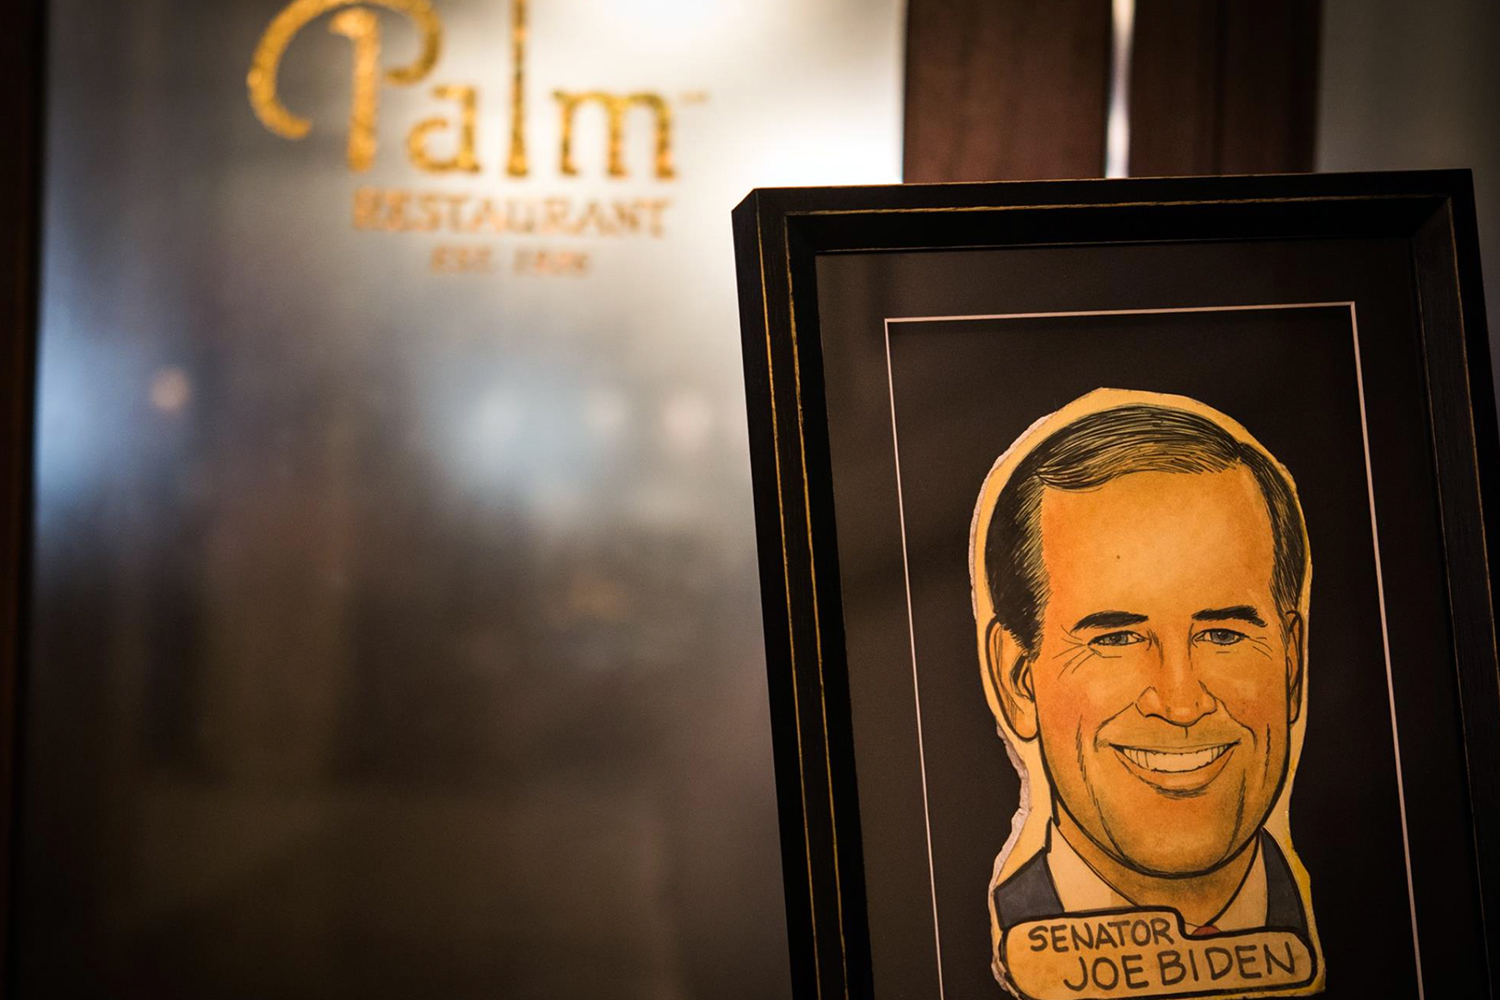 Biden's honorary caricature at The Palm.